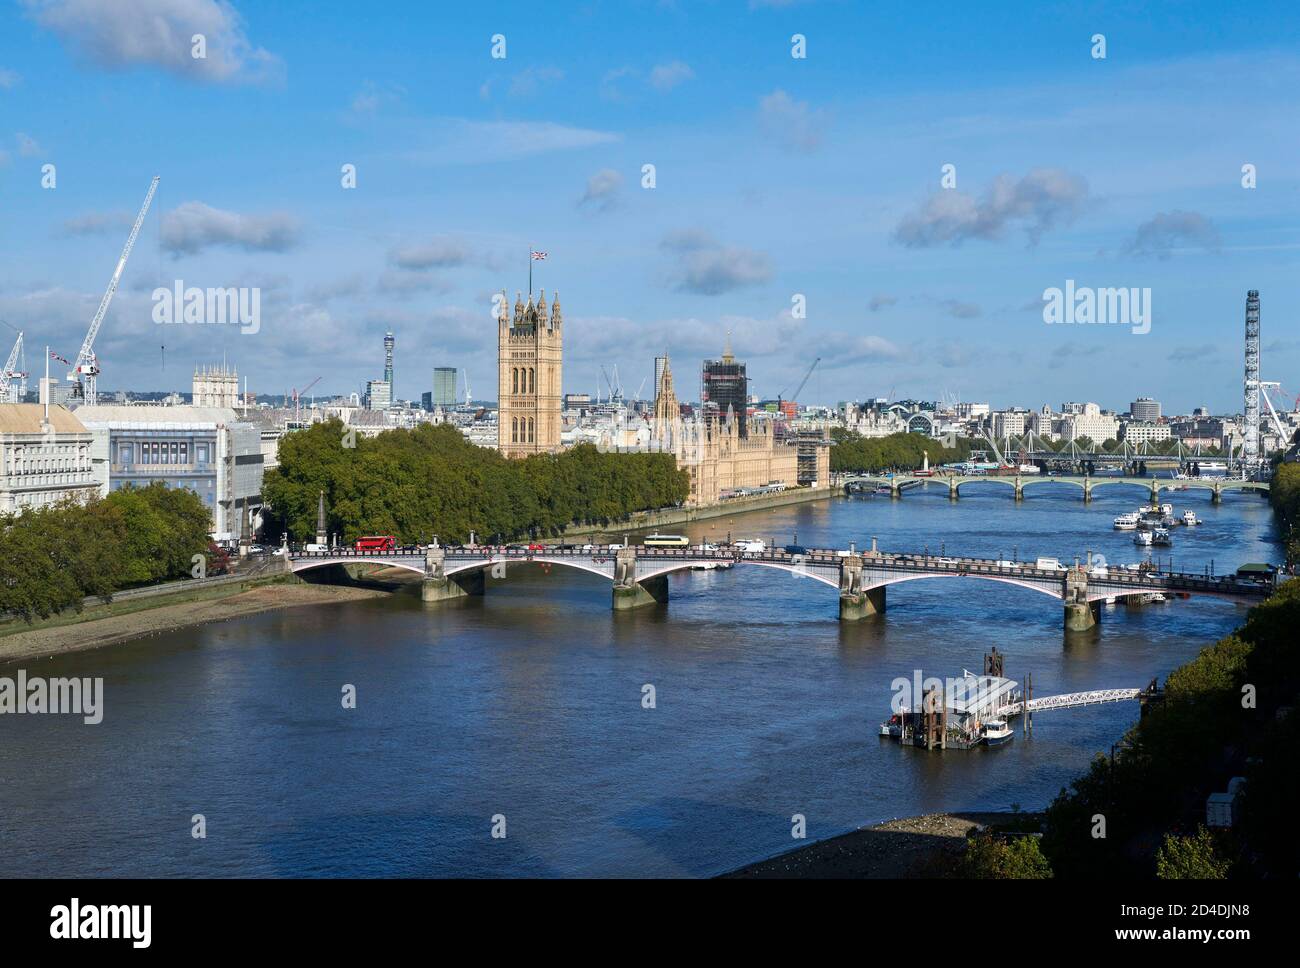 A panoramic view of Westminster and the river thames, with Lambeth bridge foreground, London, UK Stock Photo